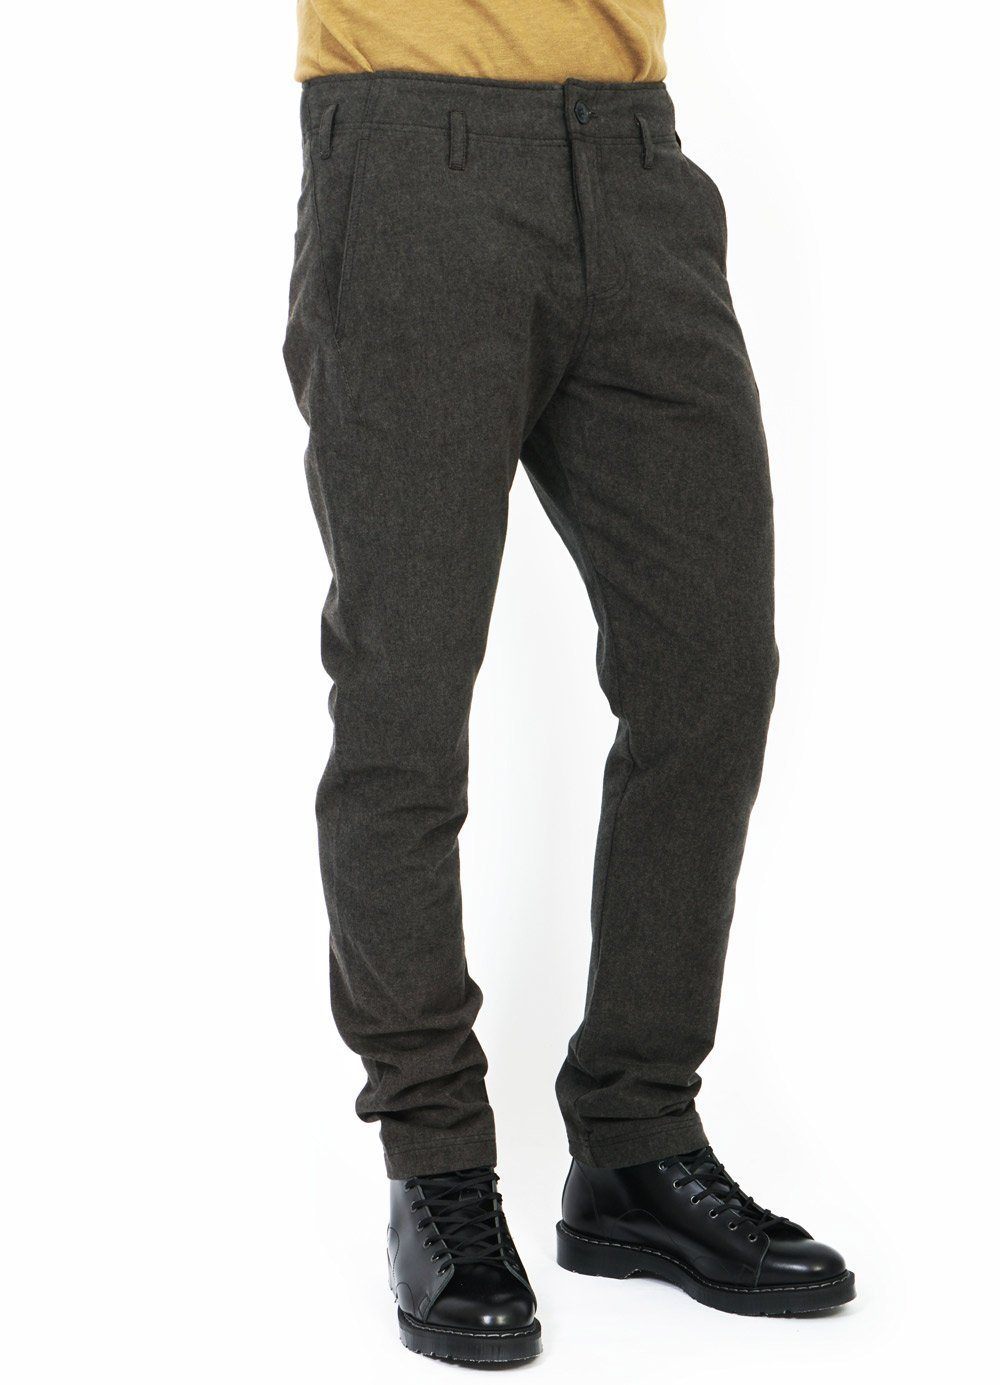 Apache Work Trousers with Holster Pockets - Grey